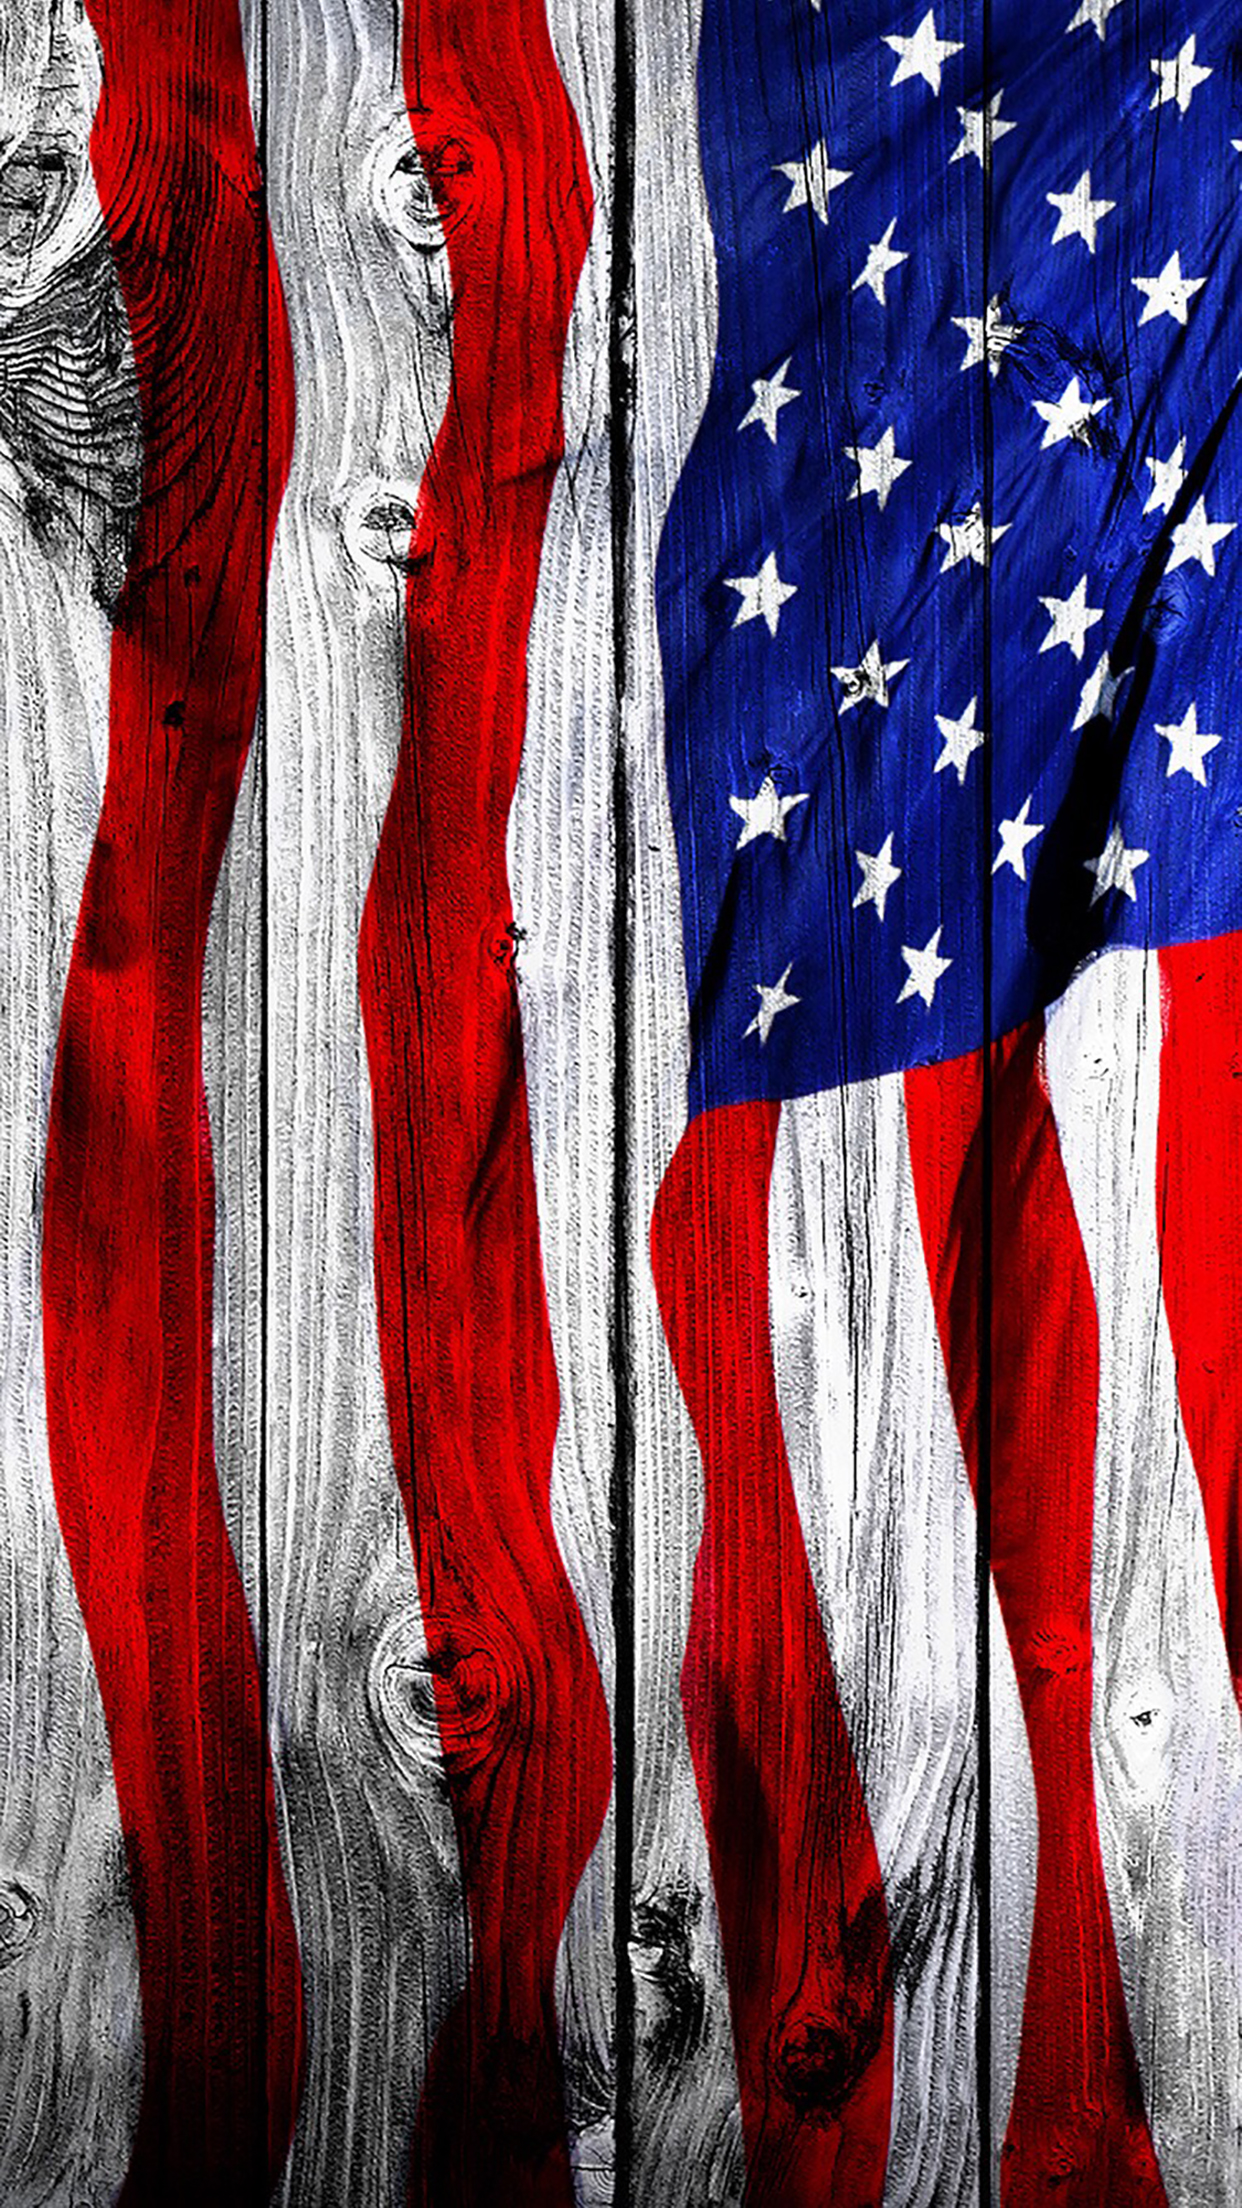 American Flag, 1 Wallpaper for iPhone Pro Max, X, 6